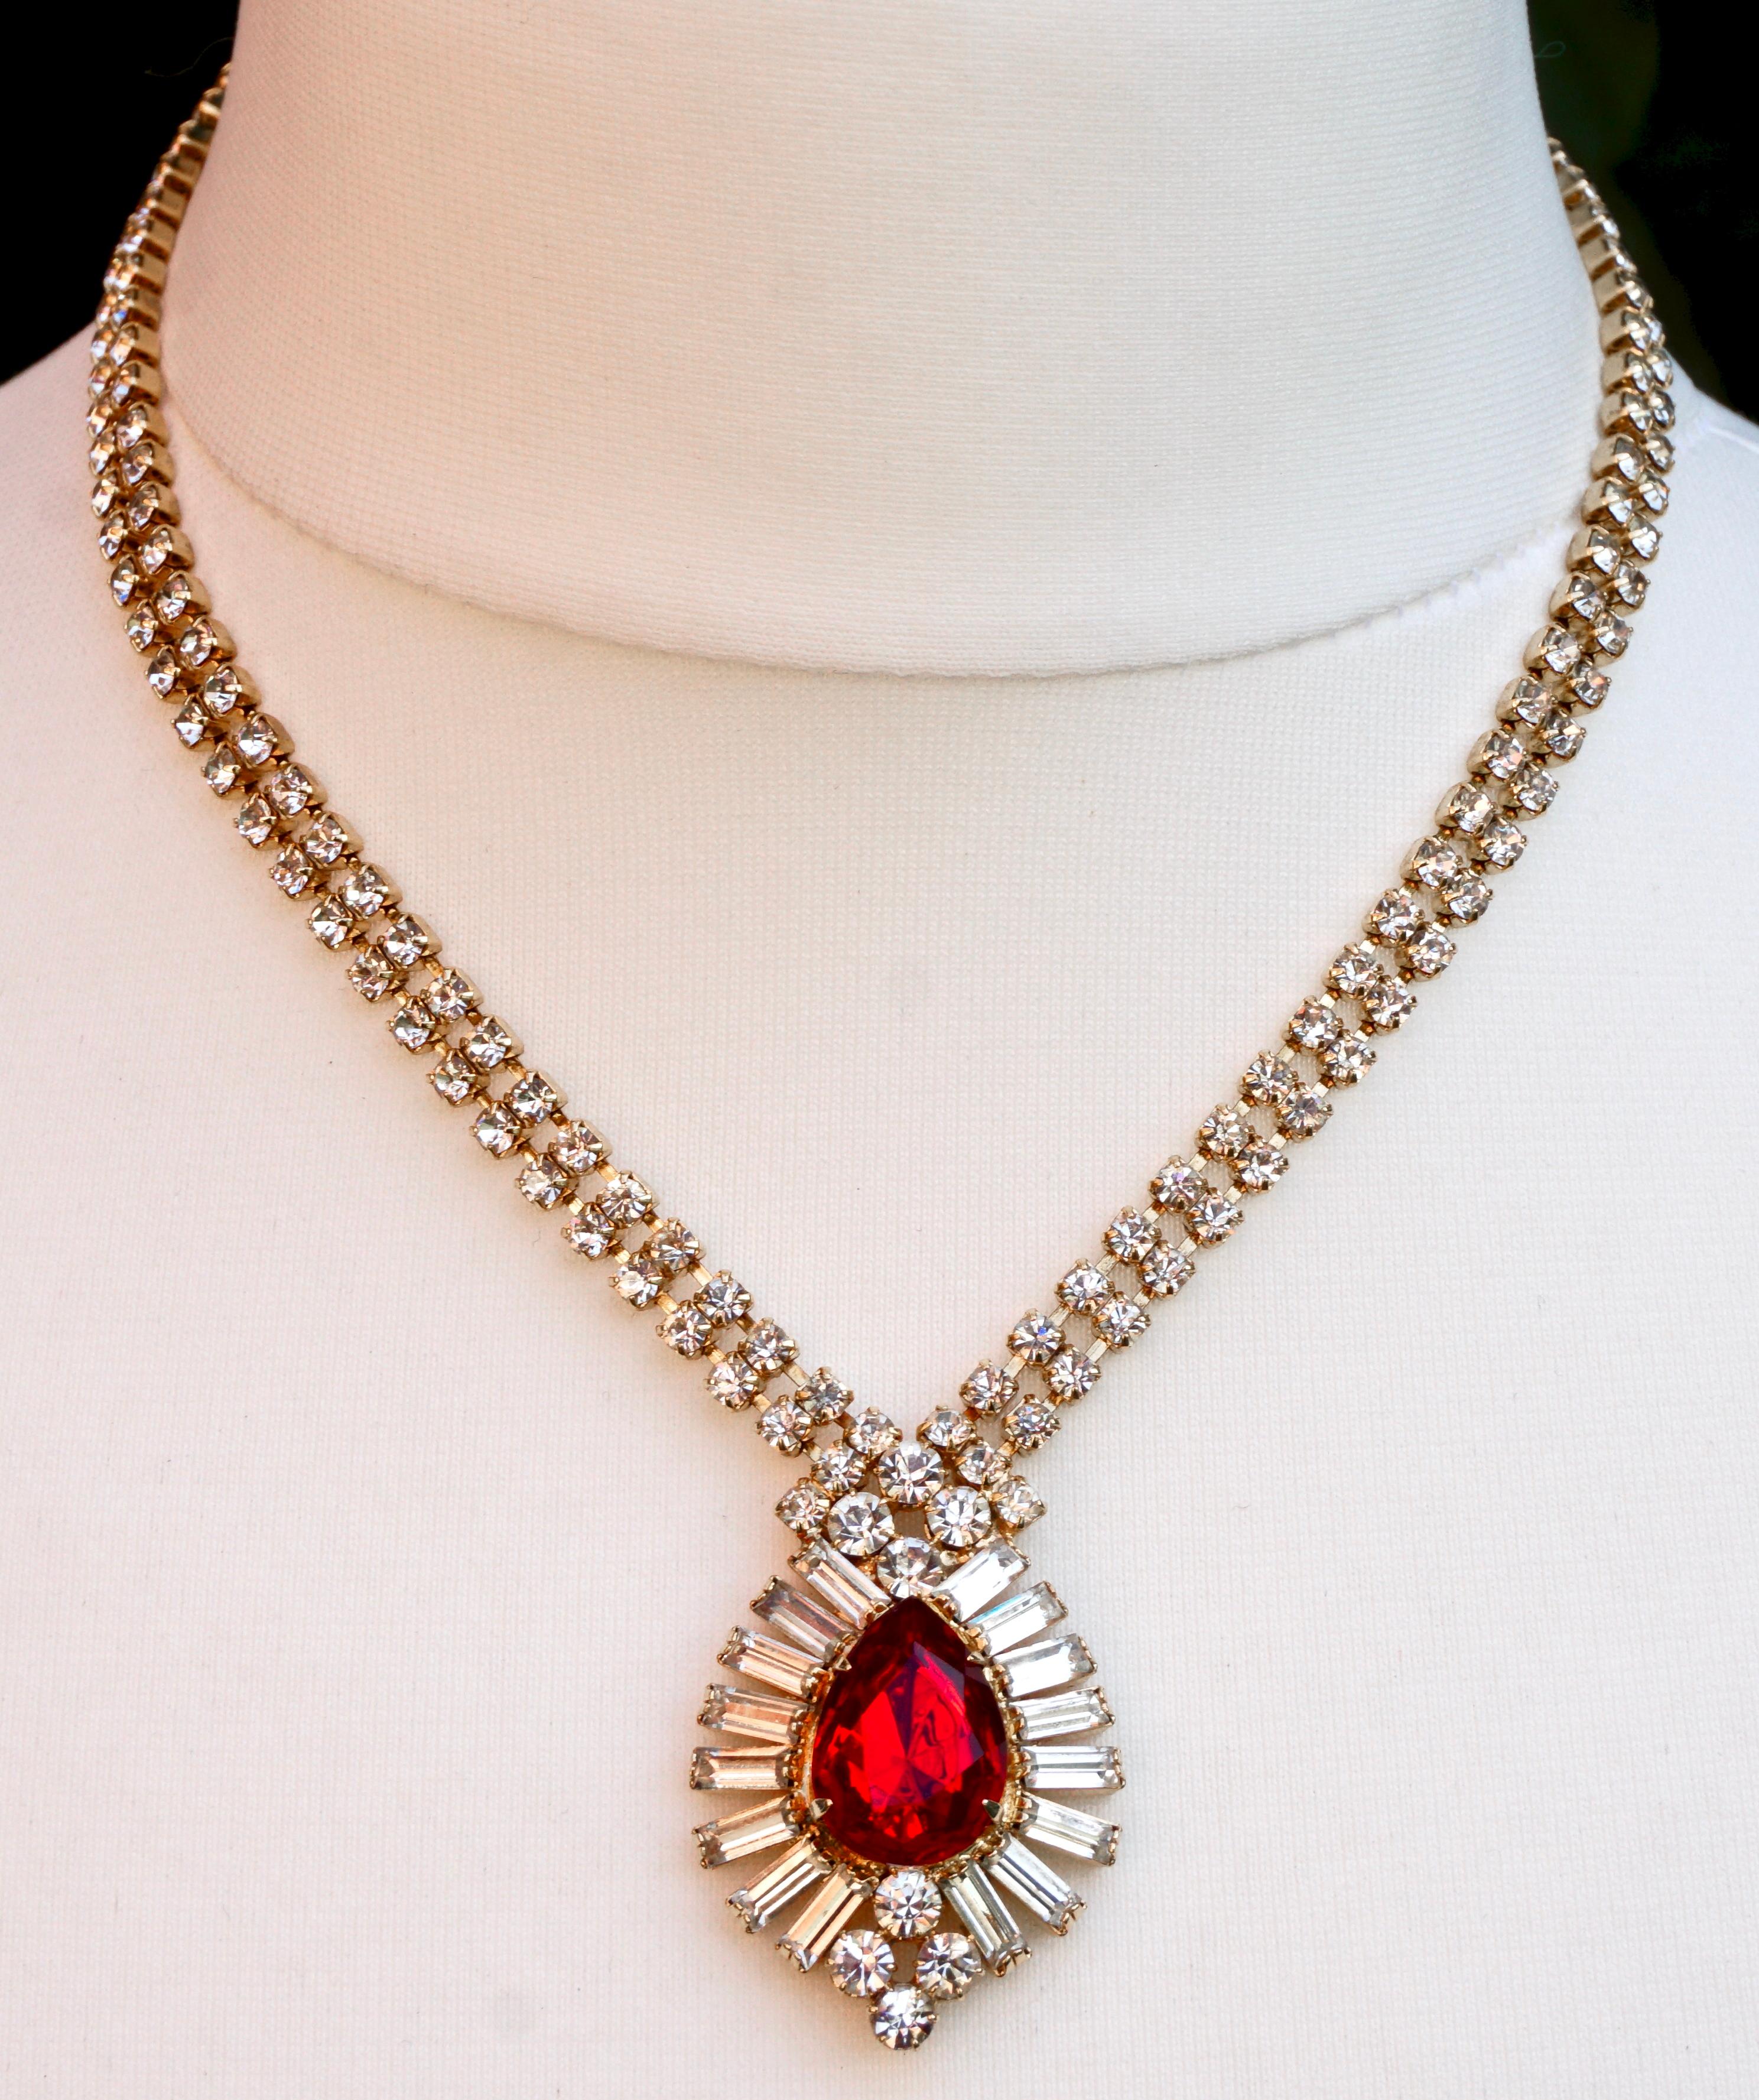 Gold tone pendant necklace featuring clear baguette and round rhinestones, and the pendant is set with a lovely red teardrop rhinestone. The necklace measures length 43.18cm / 17 inches by width 6mm / .24 inch. The pendant is length 4cm / 1.57